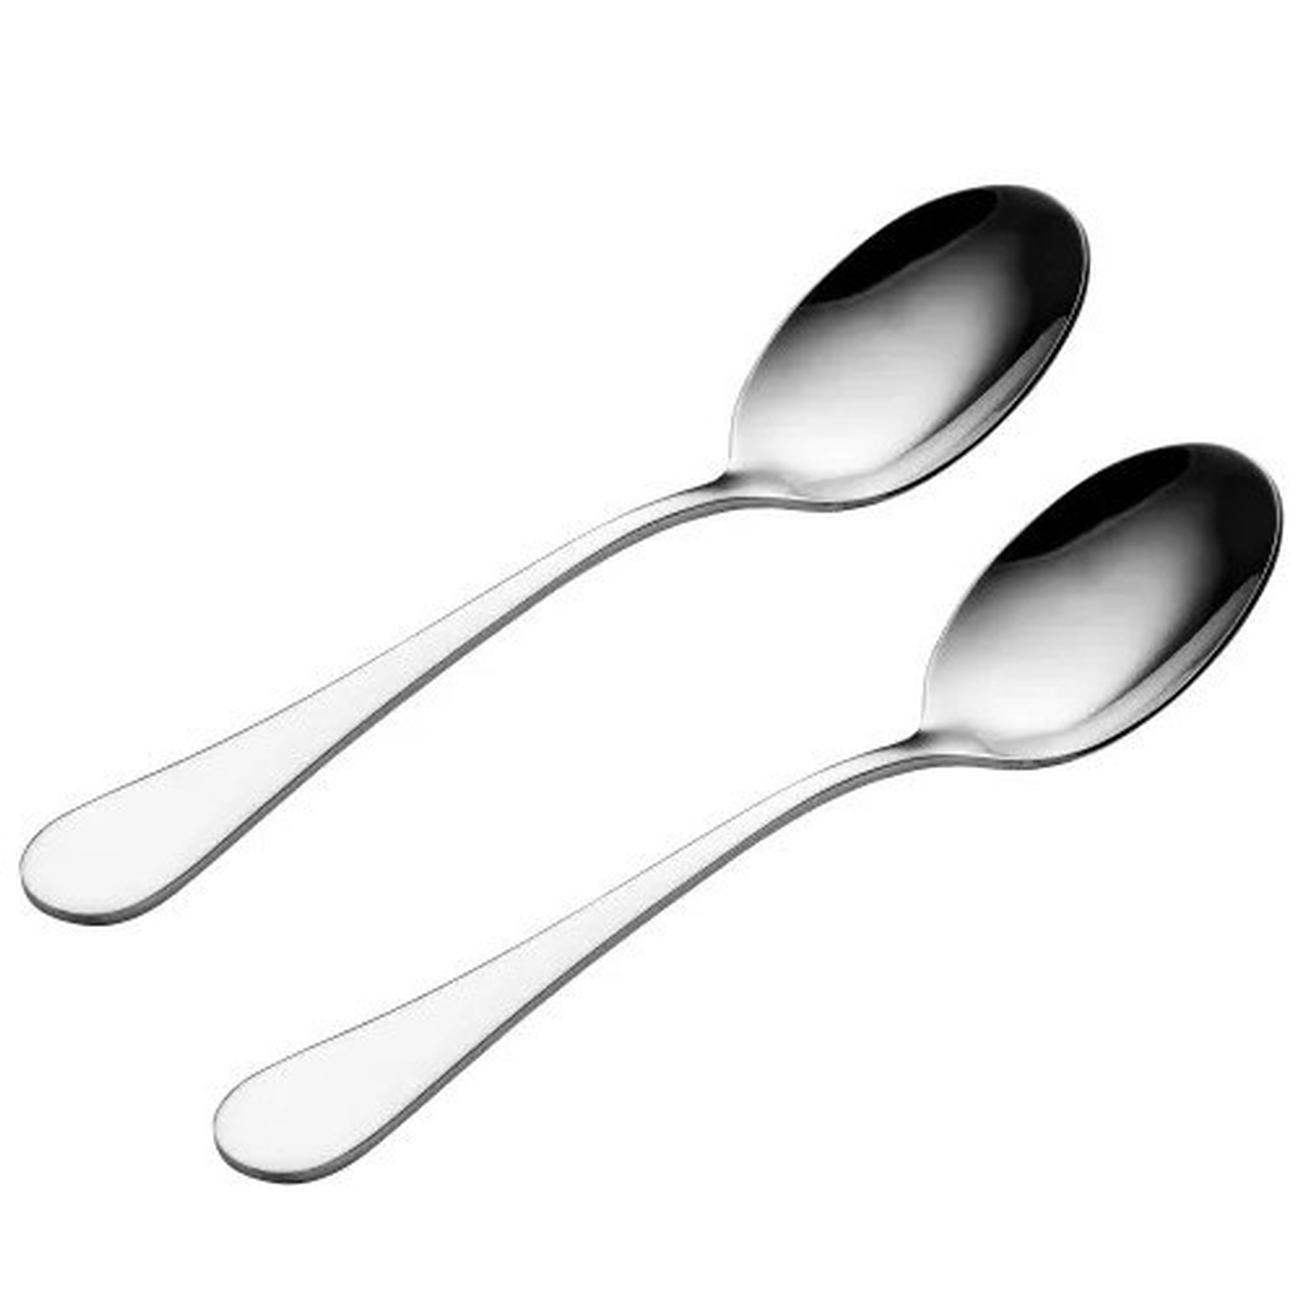 viners-select-serving-spoons-set-of-2-stainless-steel - Viners Select Serving Spoons Set of 2